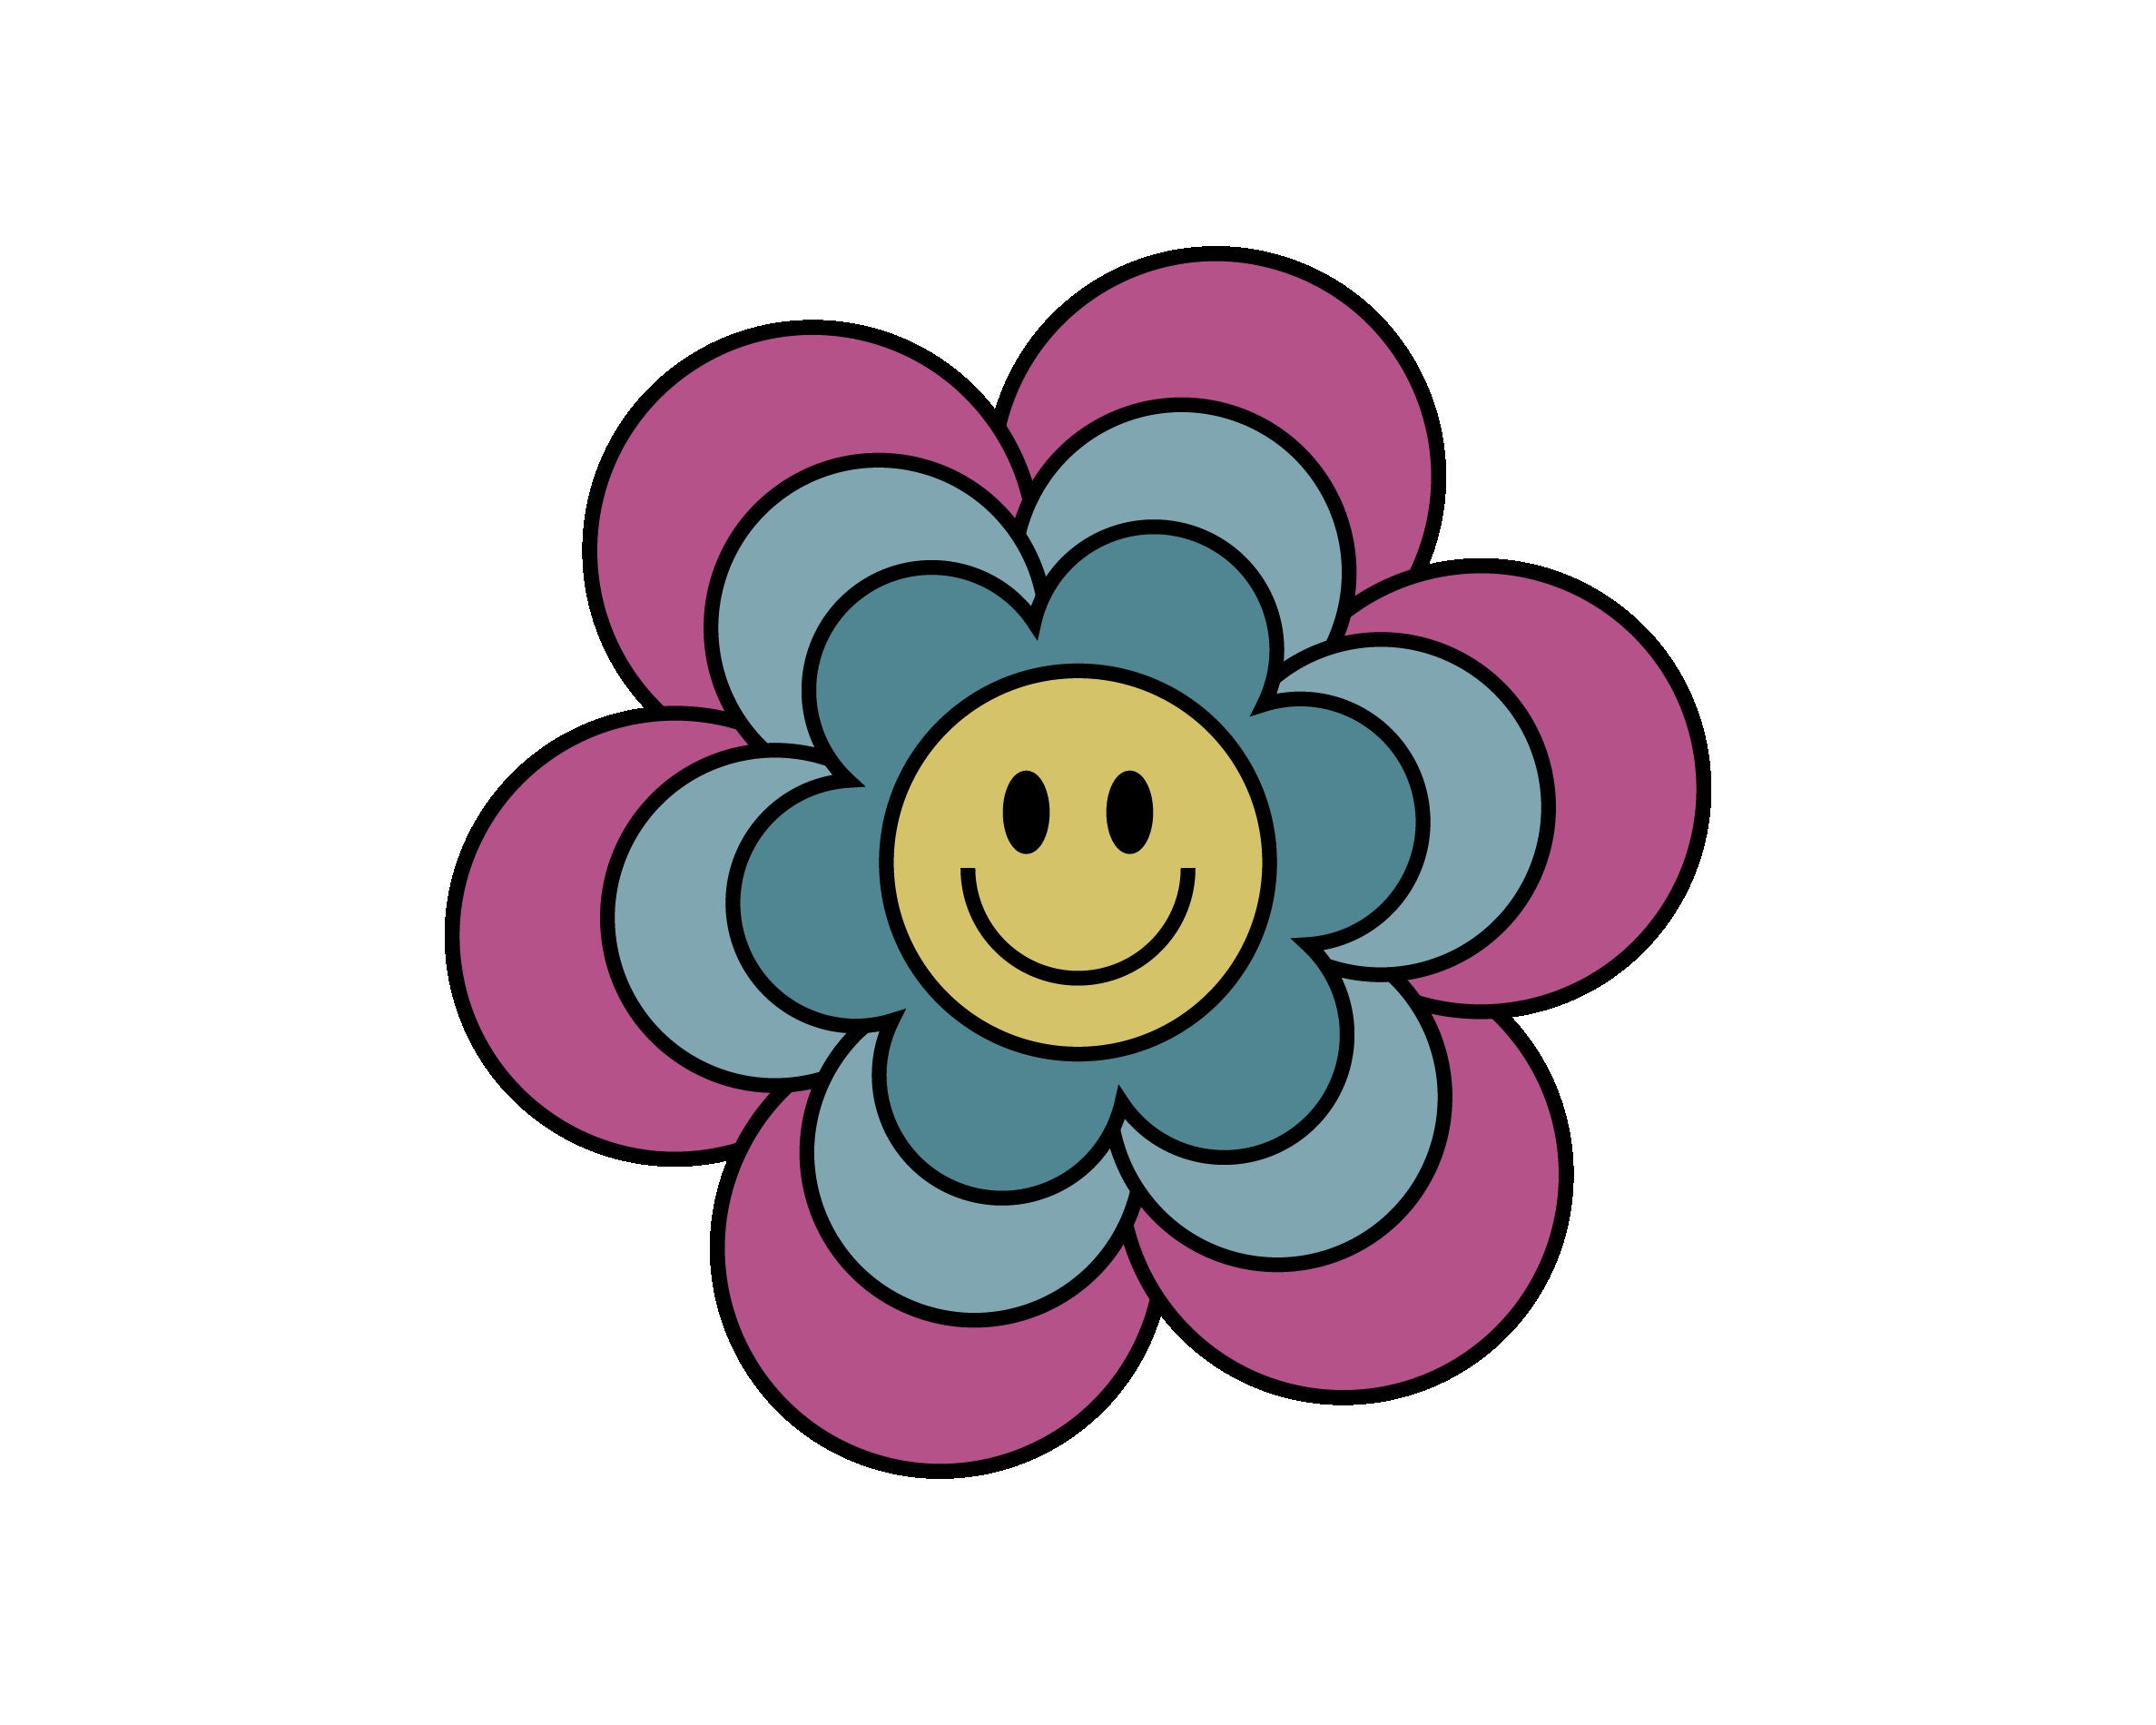 SMILEY FACE LOGO by Broderick's Flowers